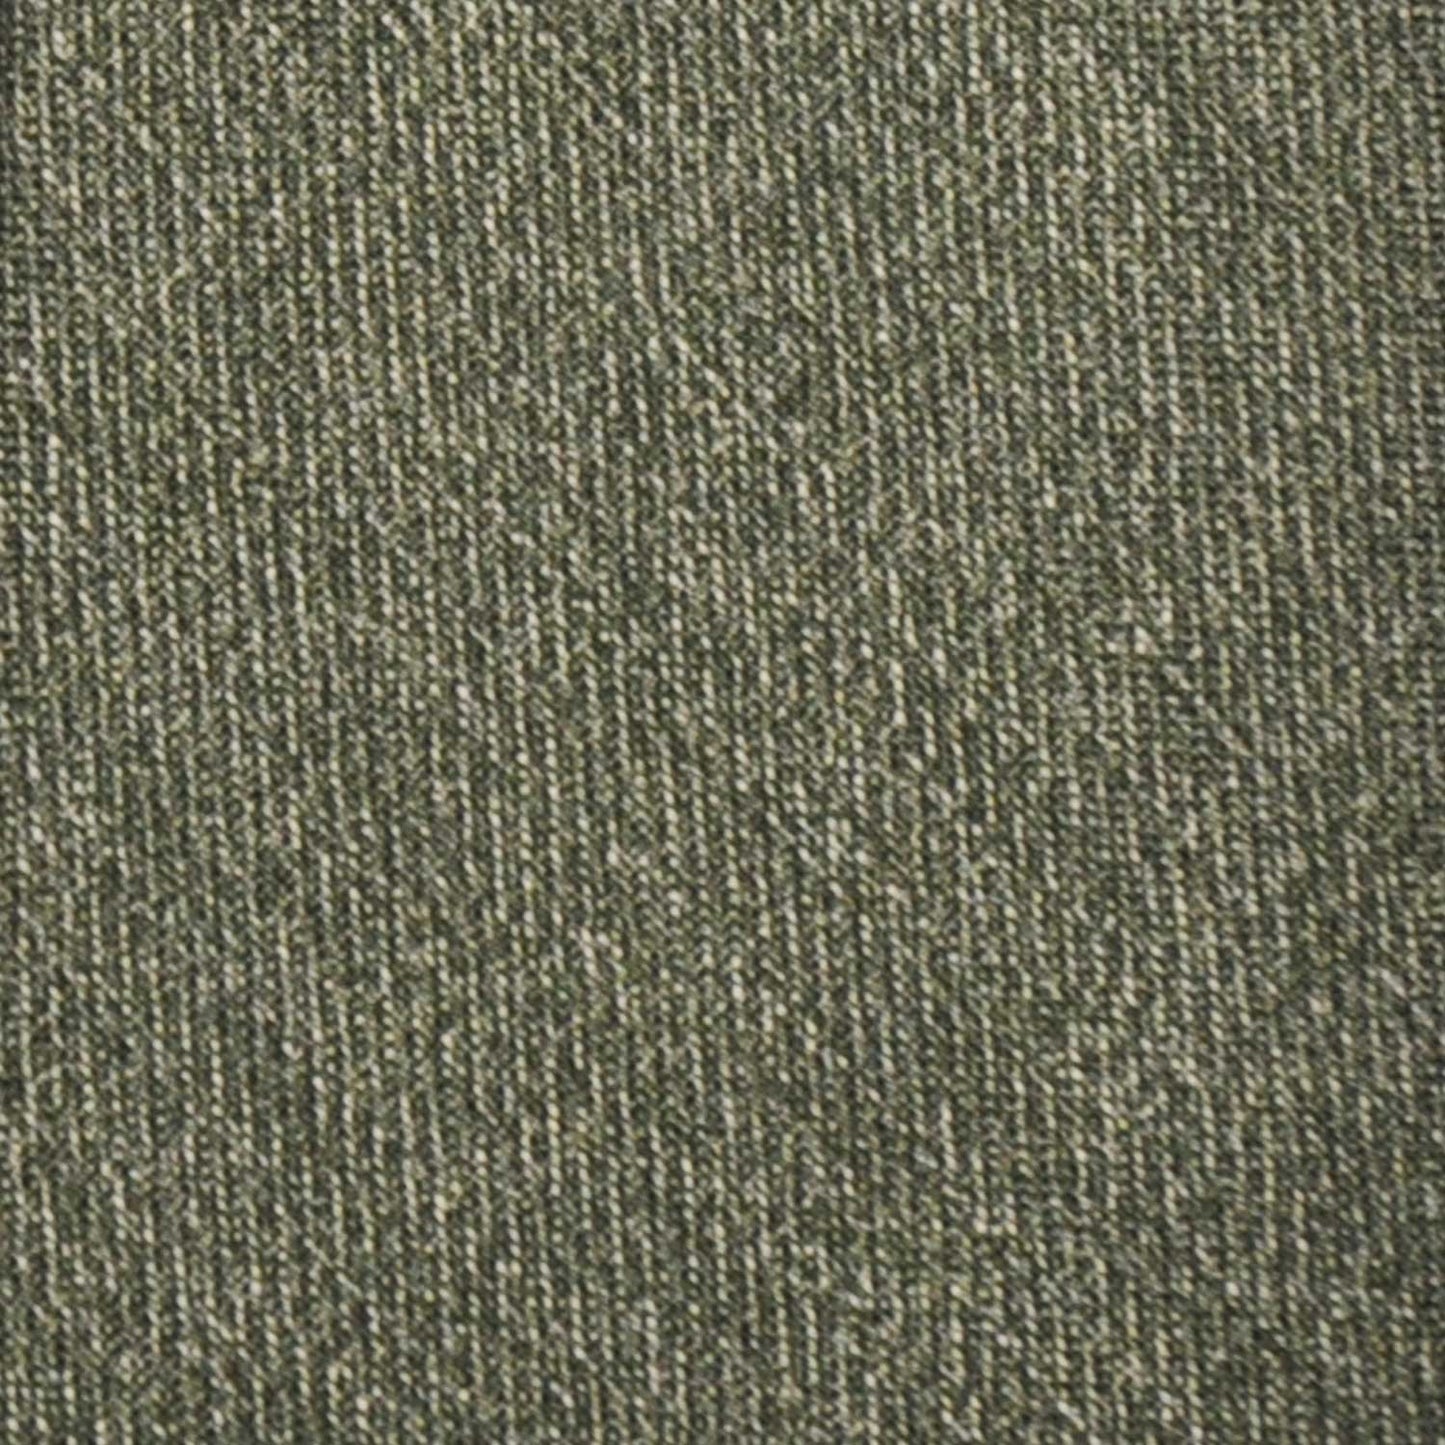 F.Marino Flamed Wool Tie Drapes 3 Folds Green-Wools Boutique Uomo